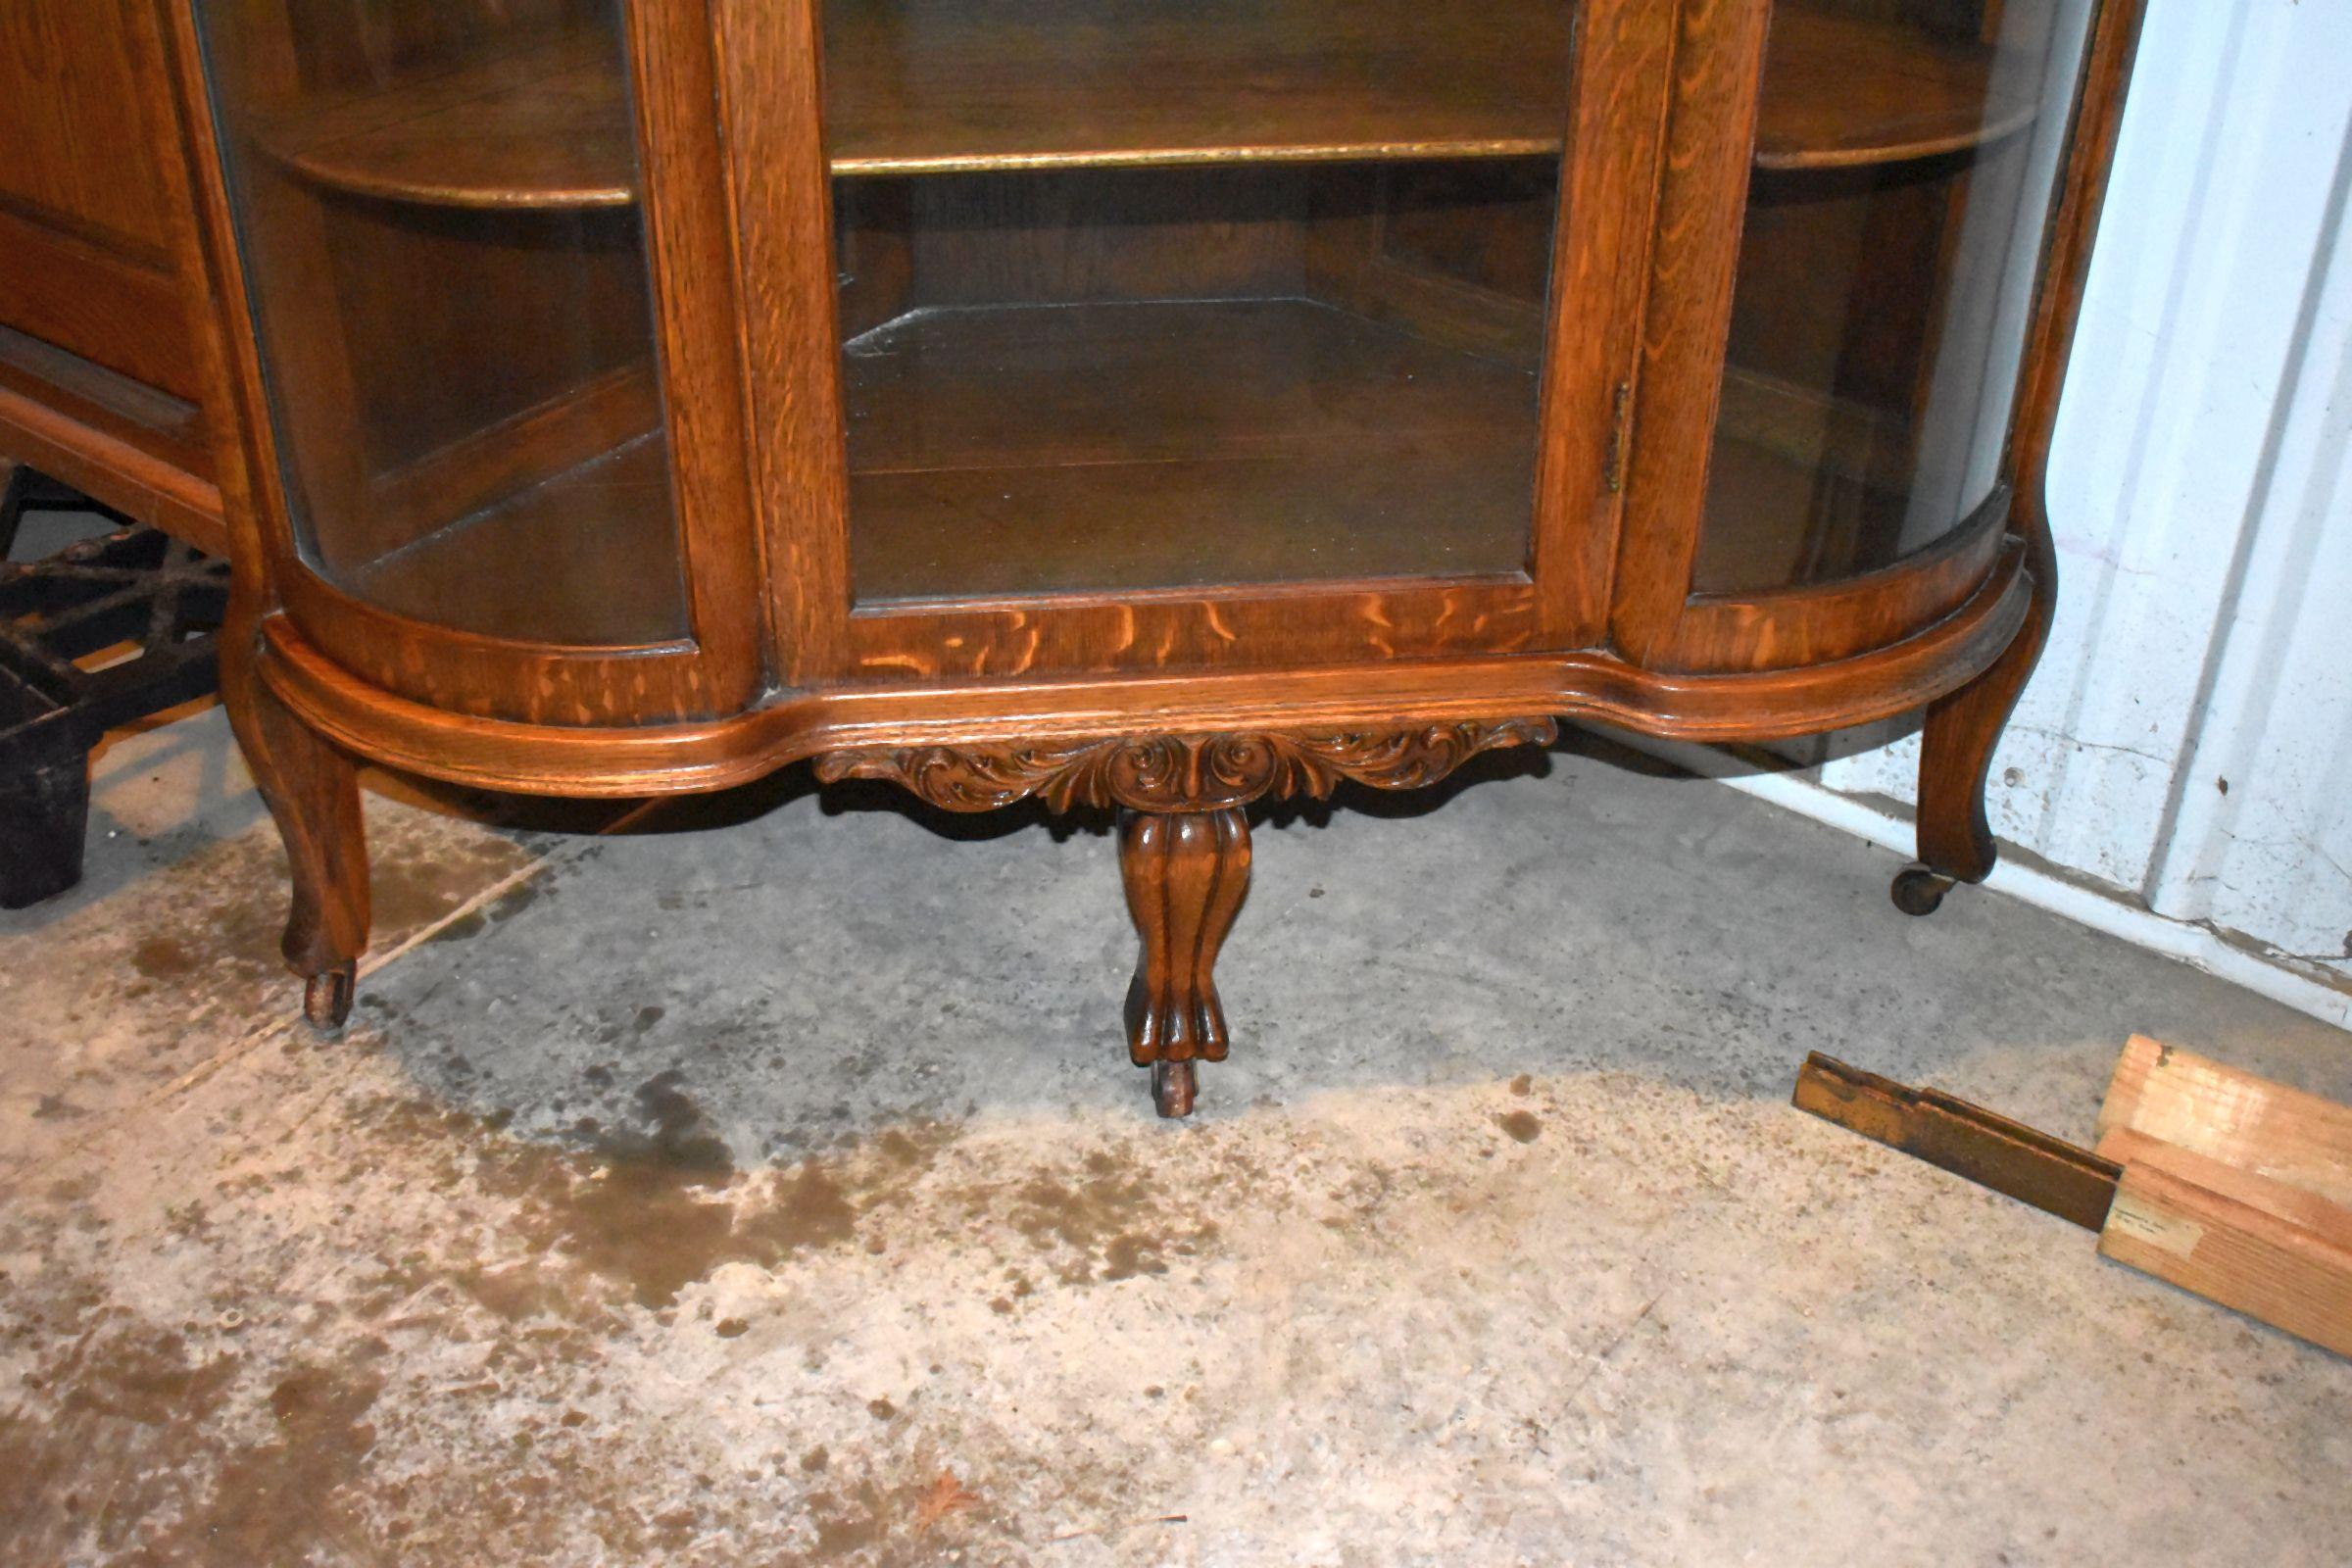 Fancy Oak Corner Double Curved Glass Curio Cabinet, Beveled Leaded Glass, 4 Wooden Shelves, Very Nic